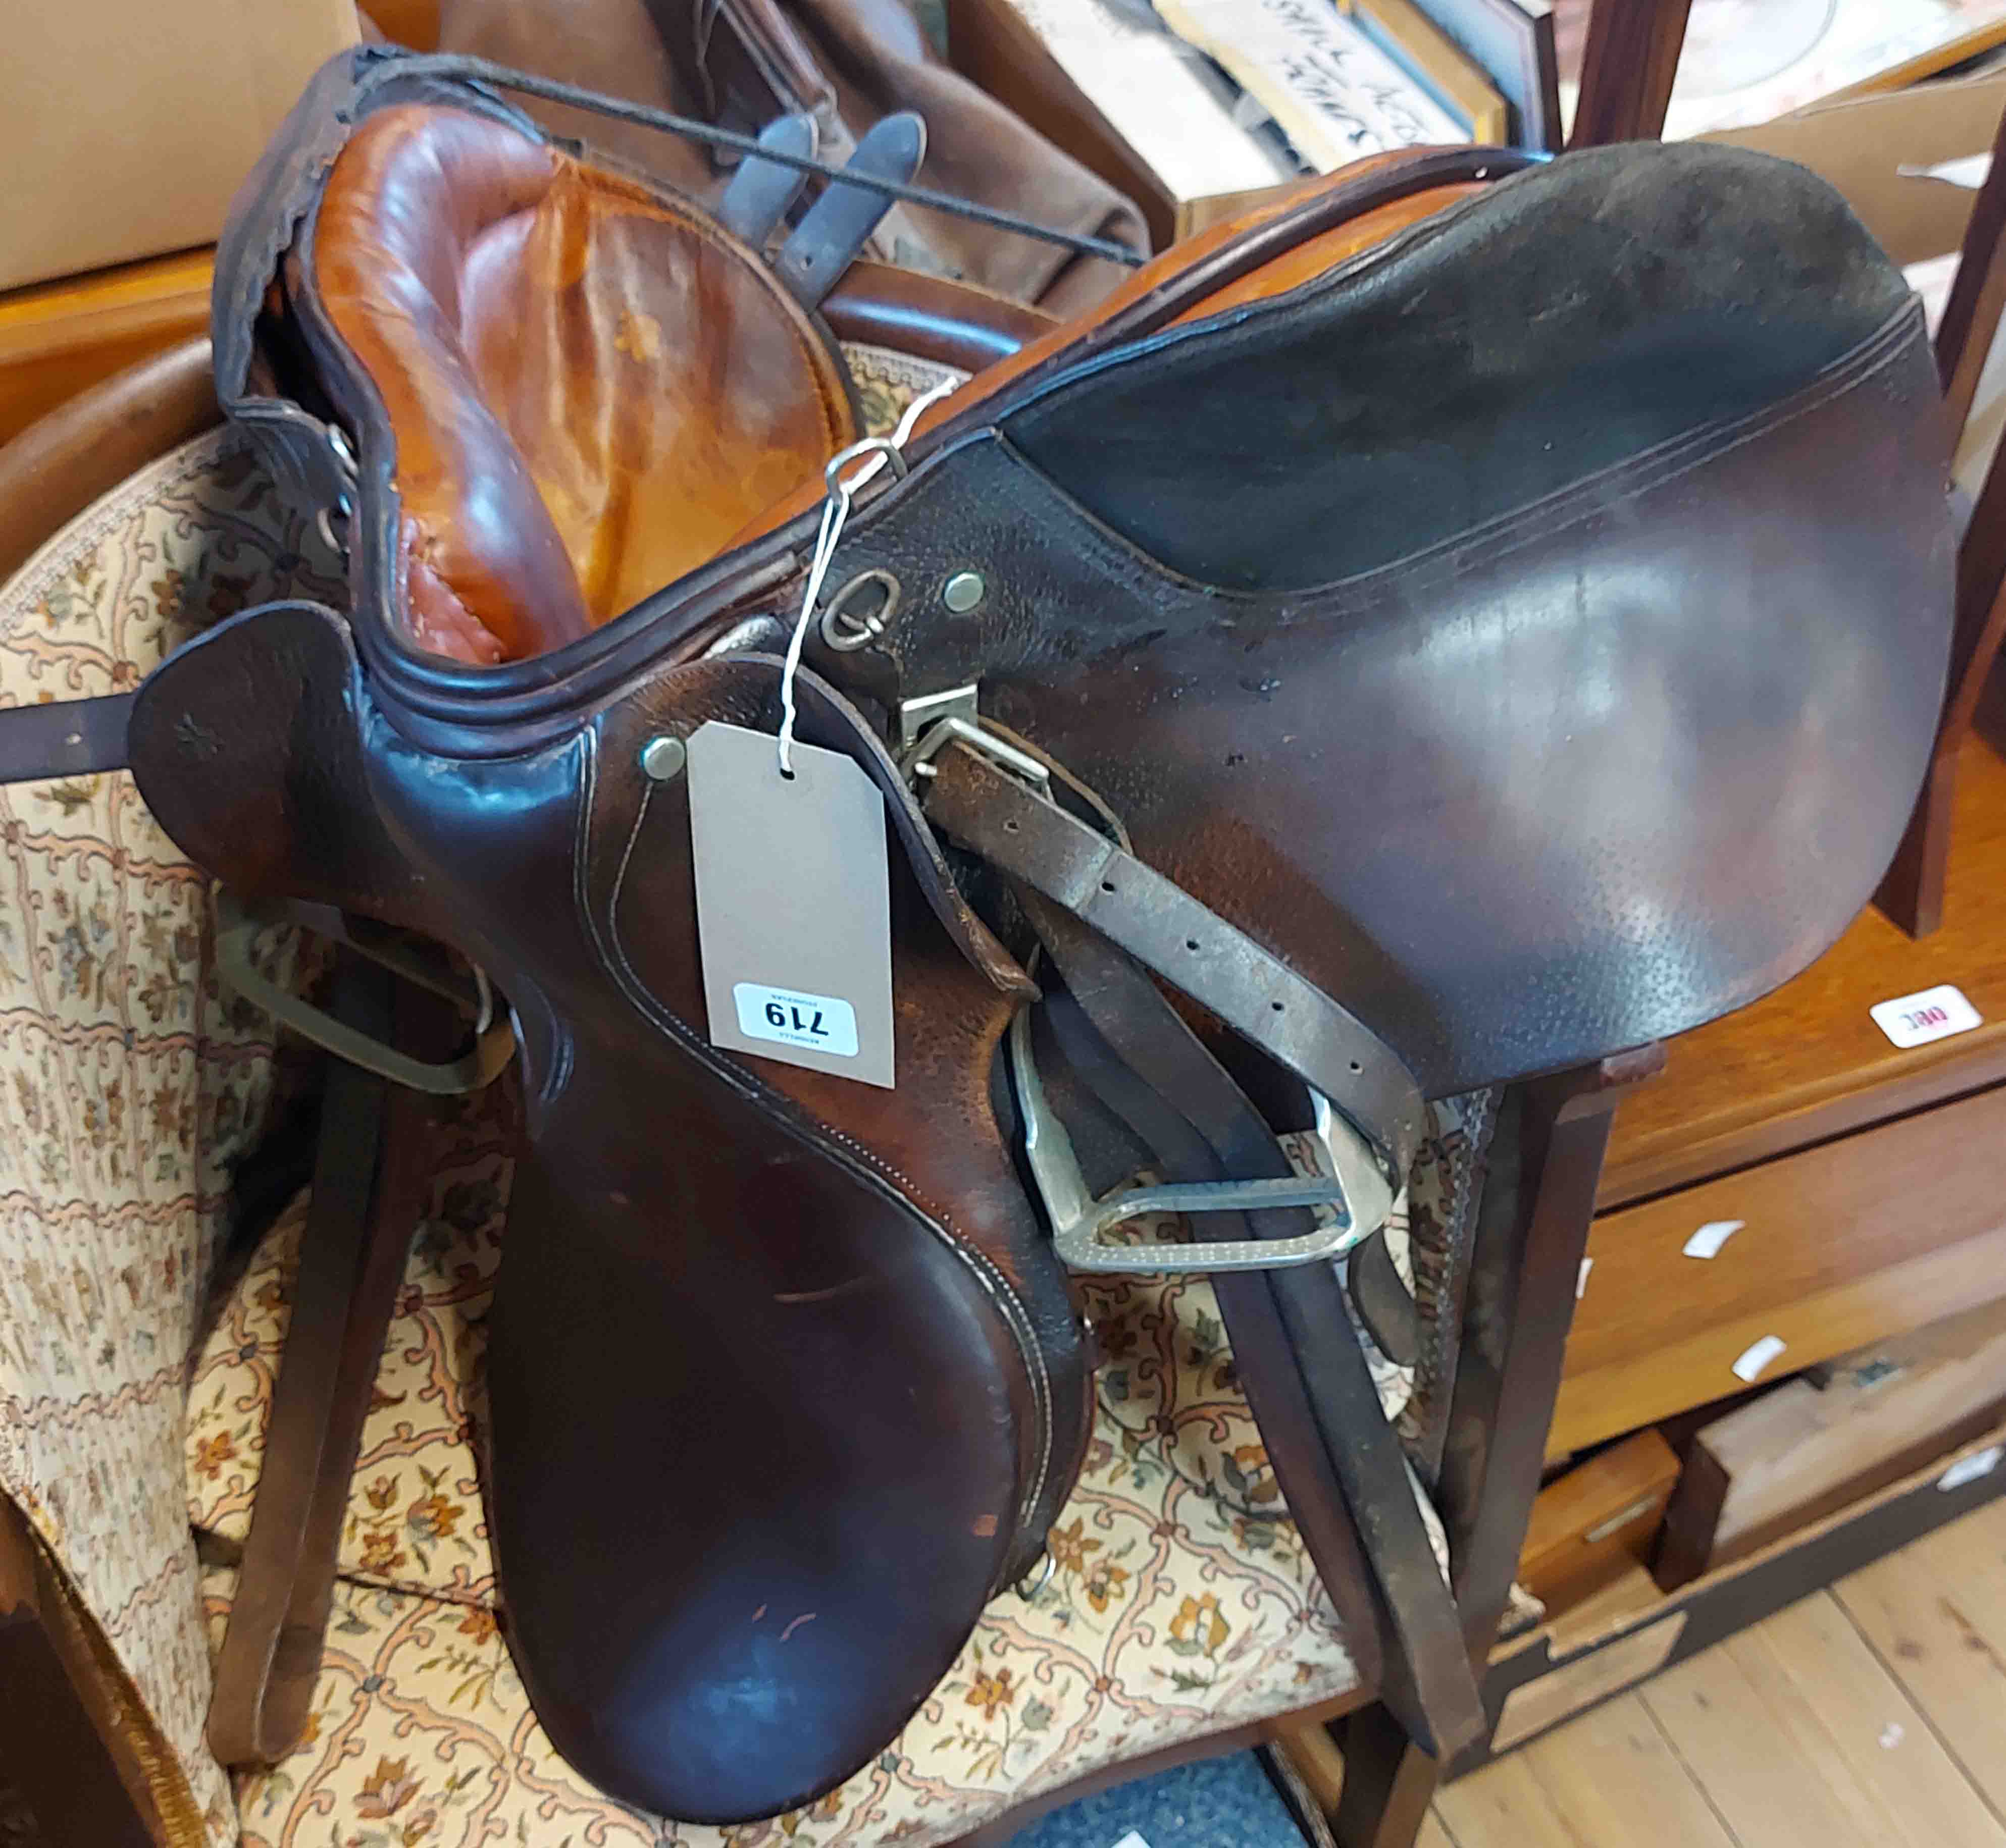 A Triumph Princess junior leather saddle - sold with two whips